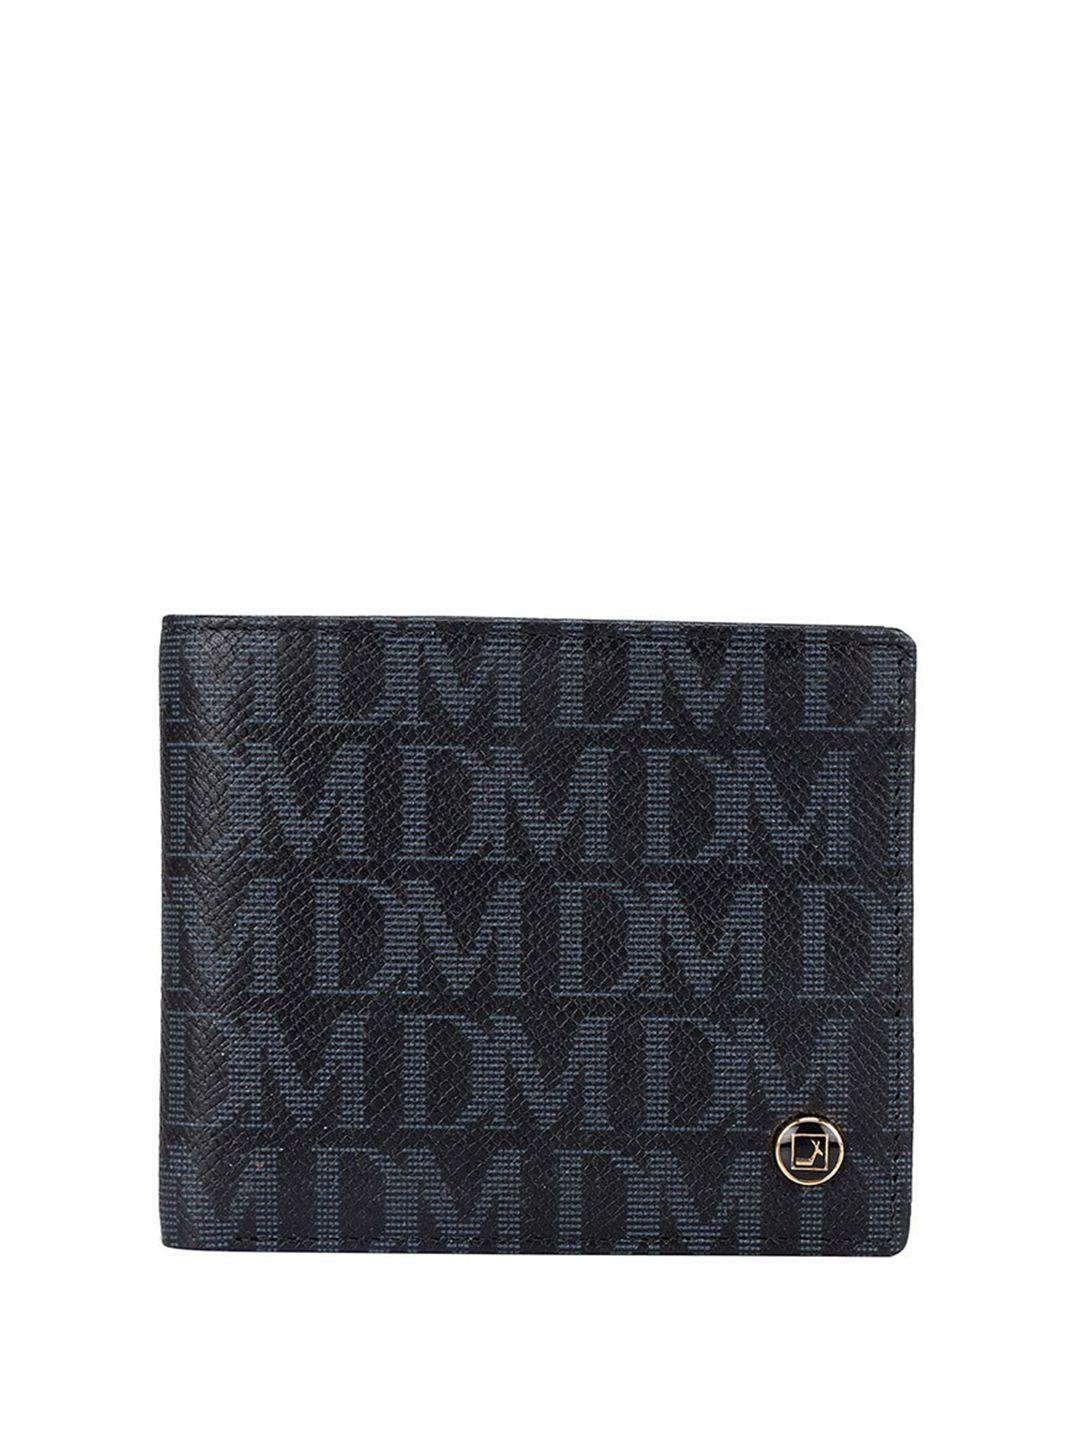 da milano typography printed leather two fold wallet